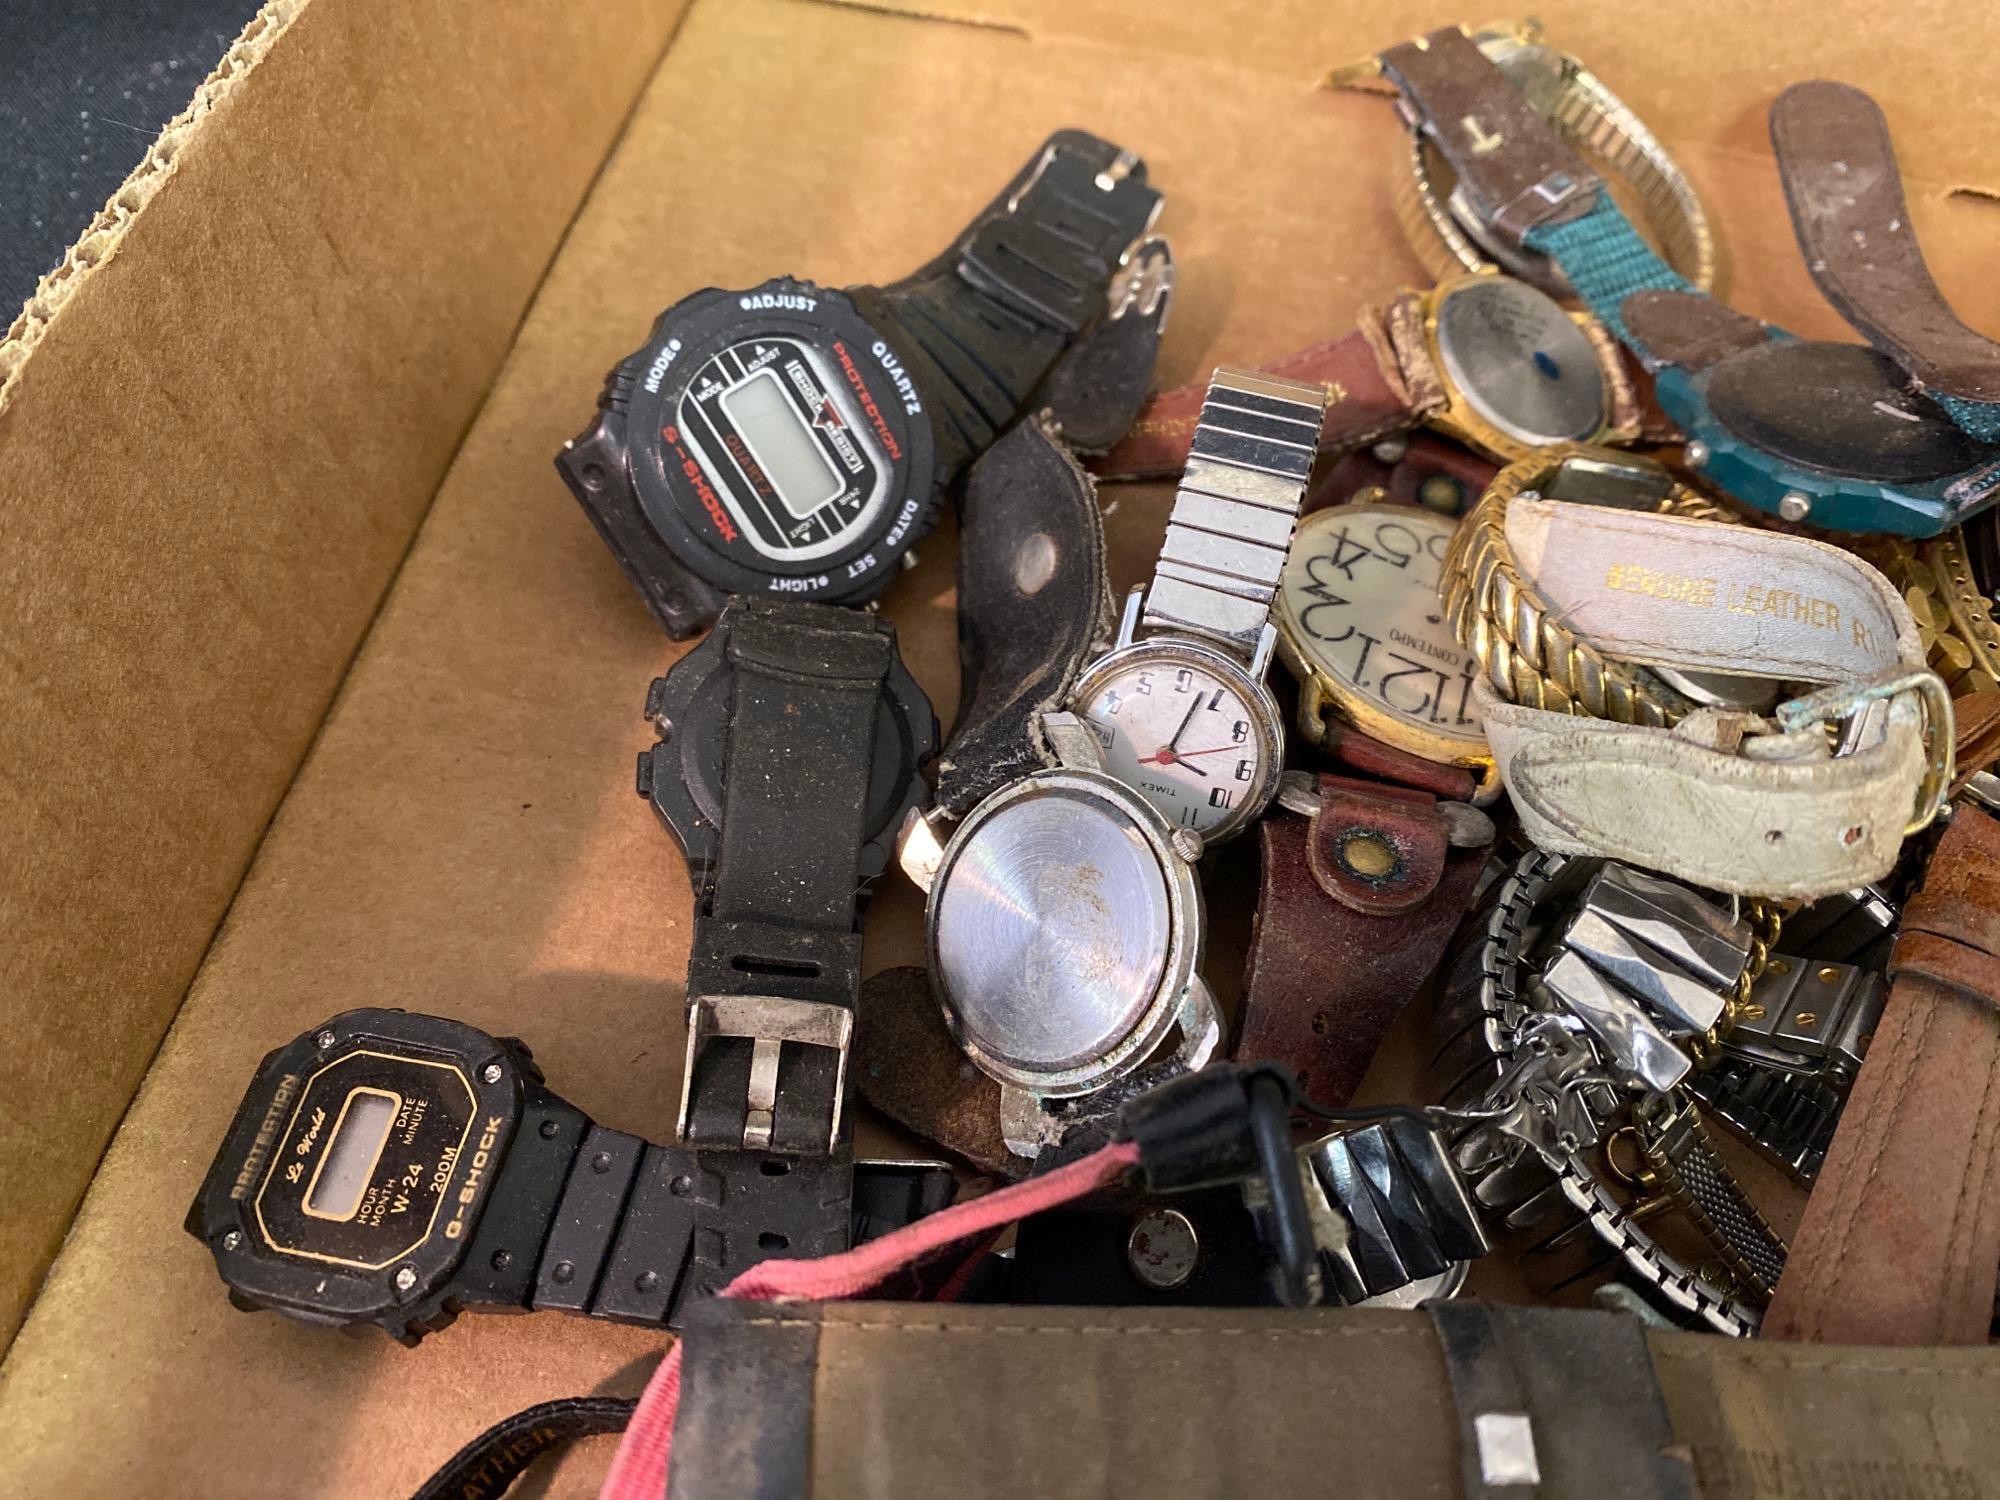 Box Full Of Wrist Watches & Parts 4lbs 4oz